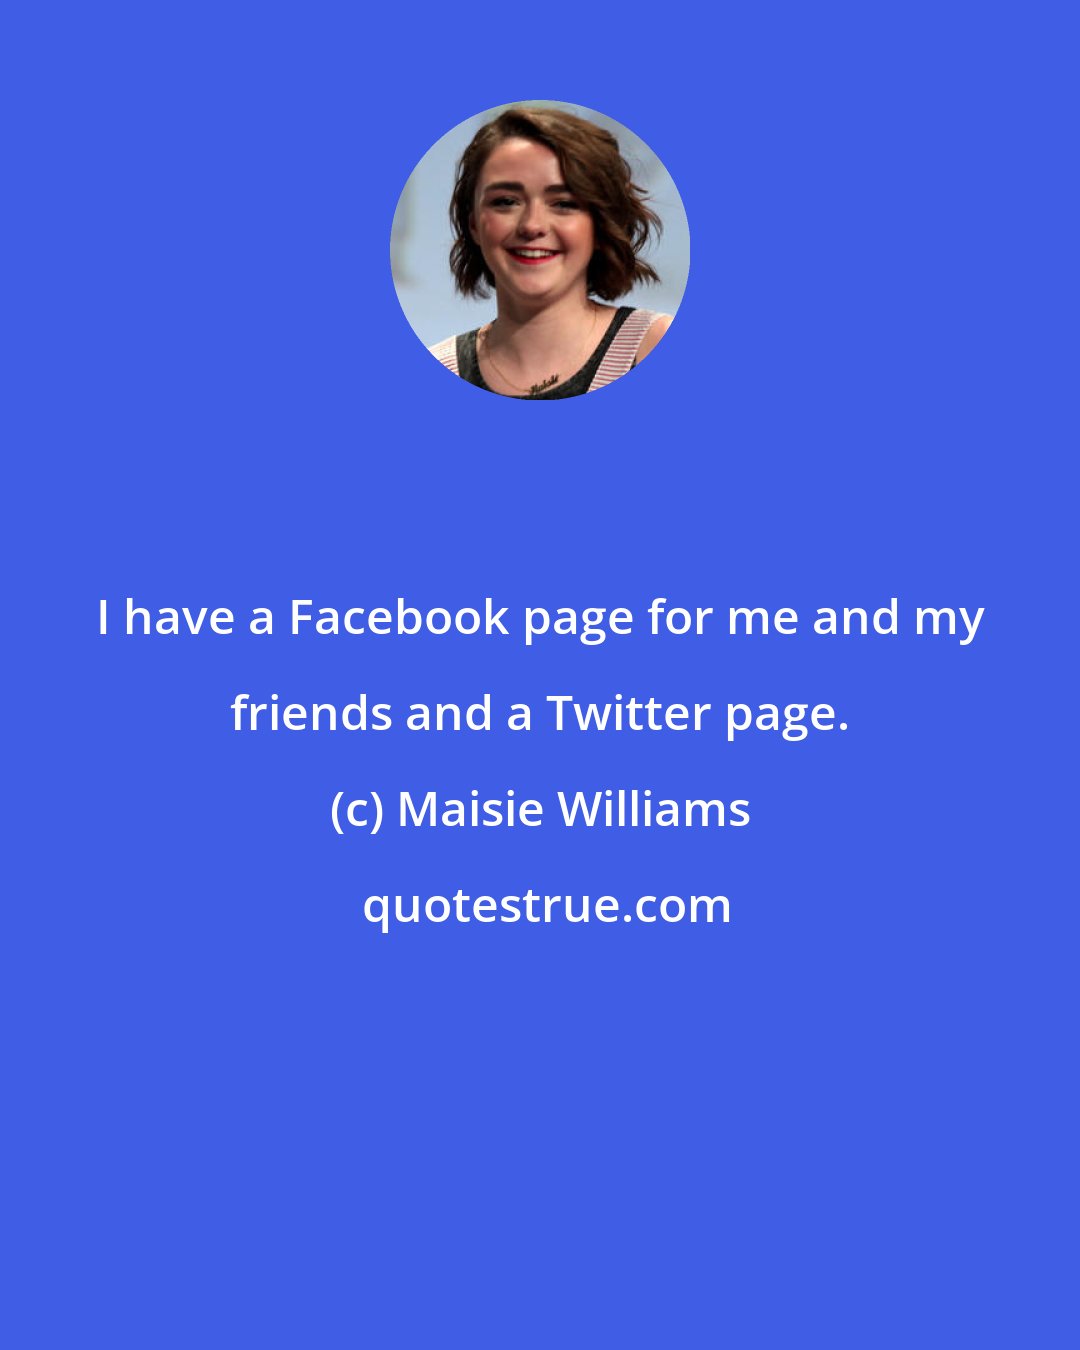 Maisie Williams: I have a Facebook page for me and my friends and a Twitter page.